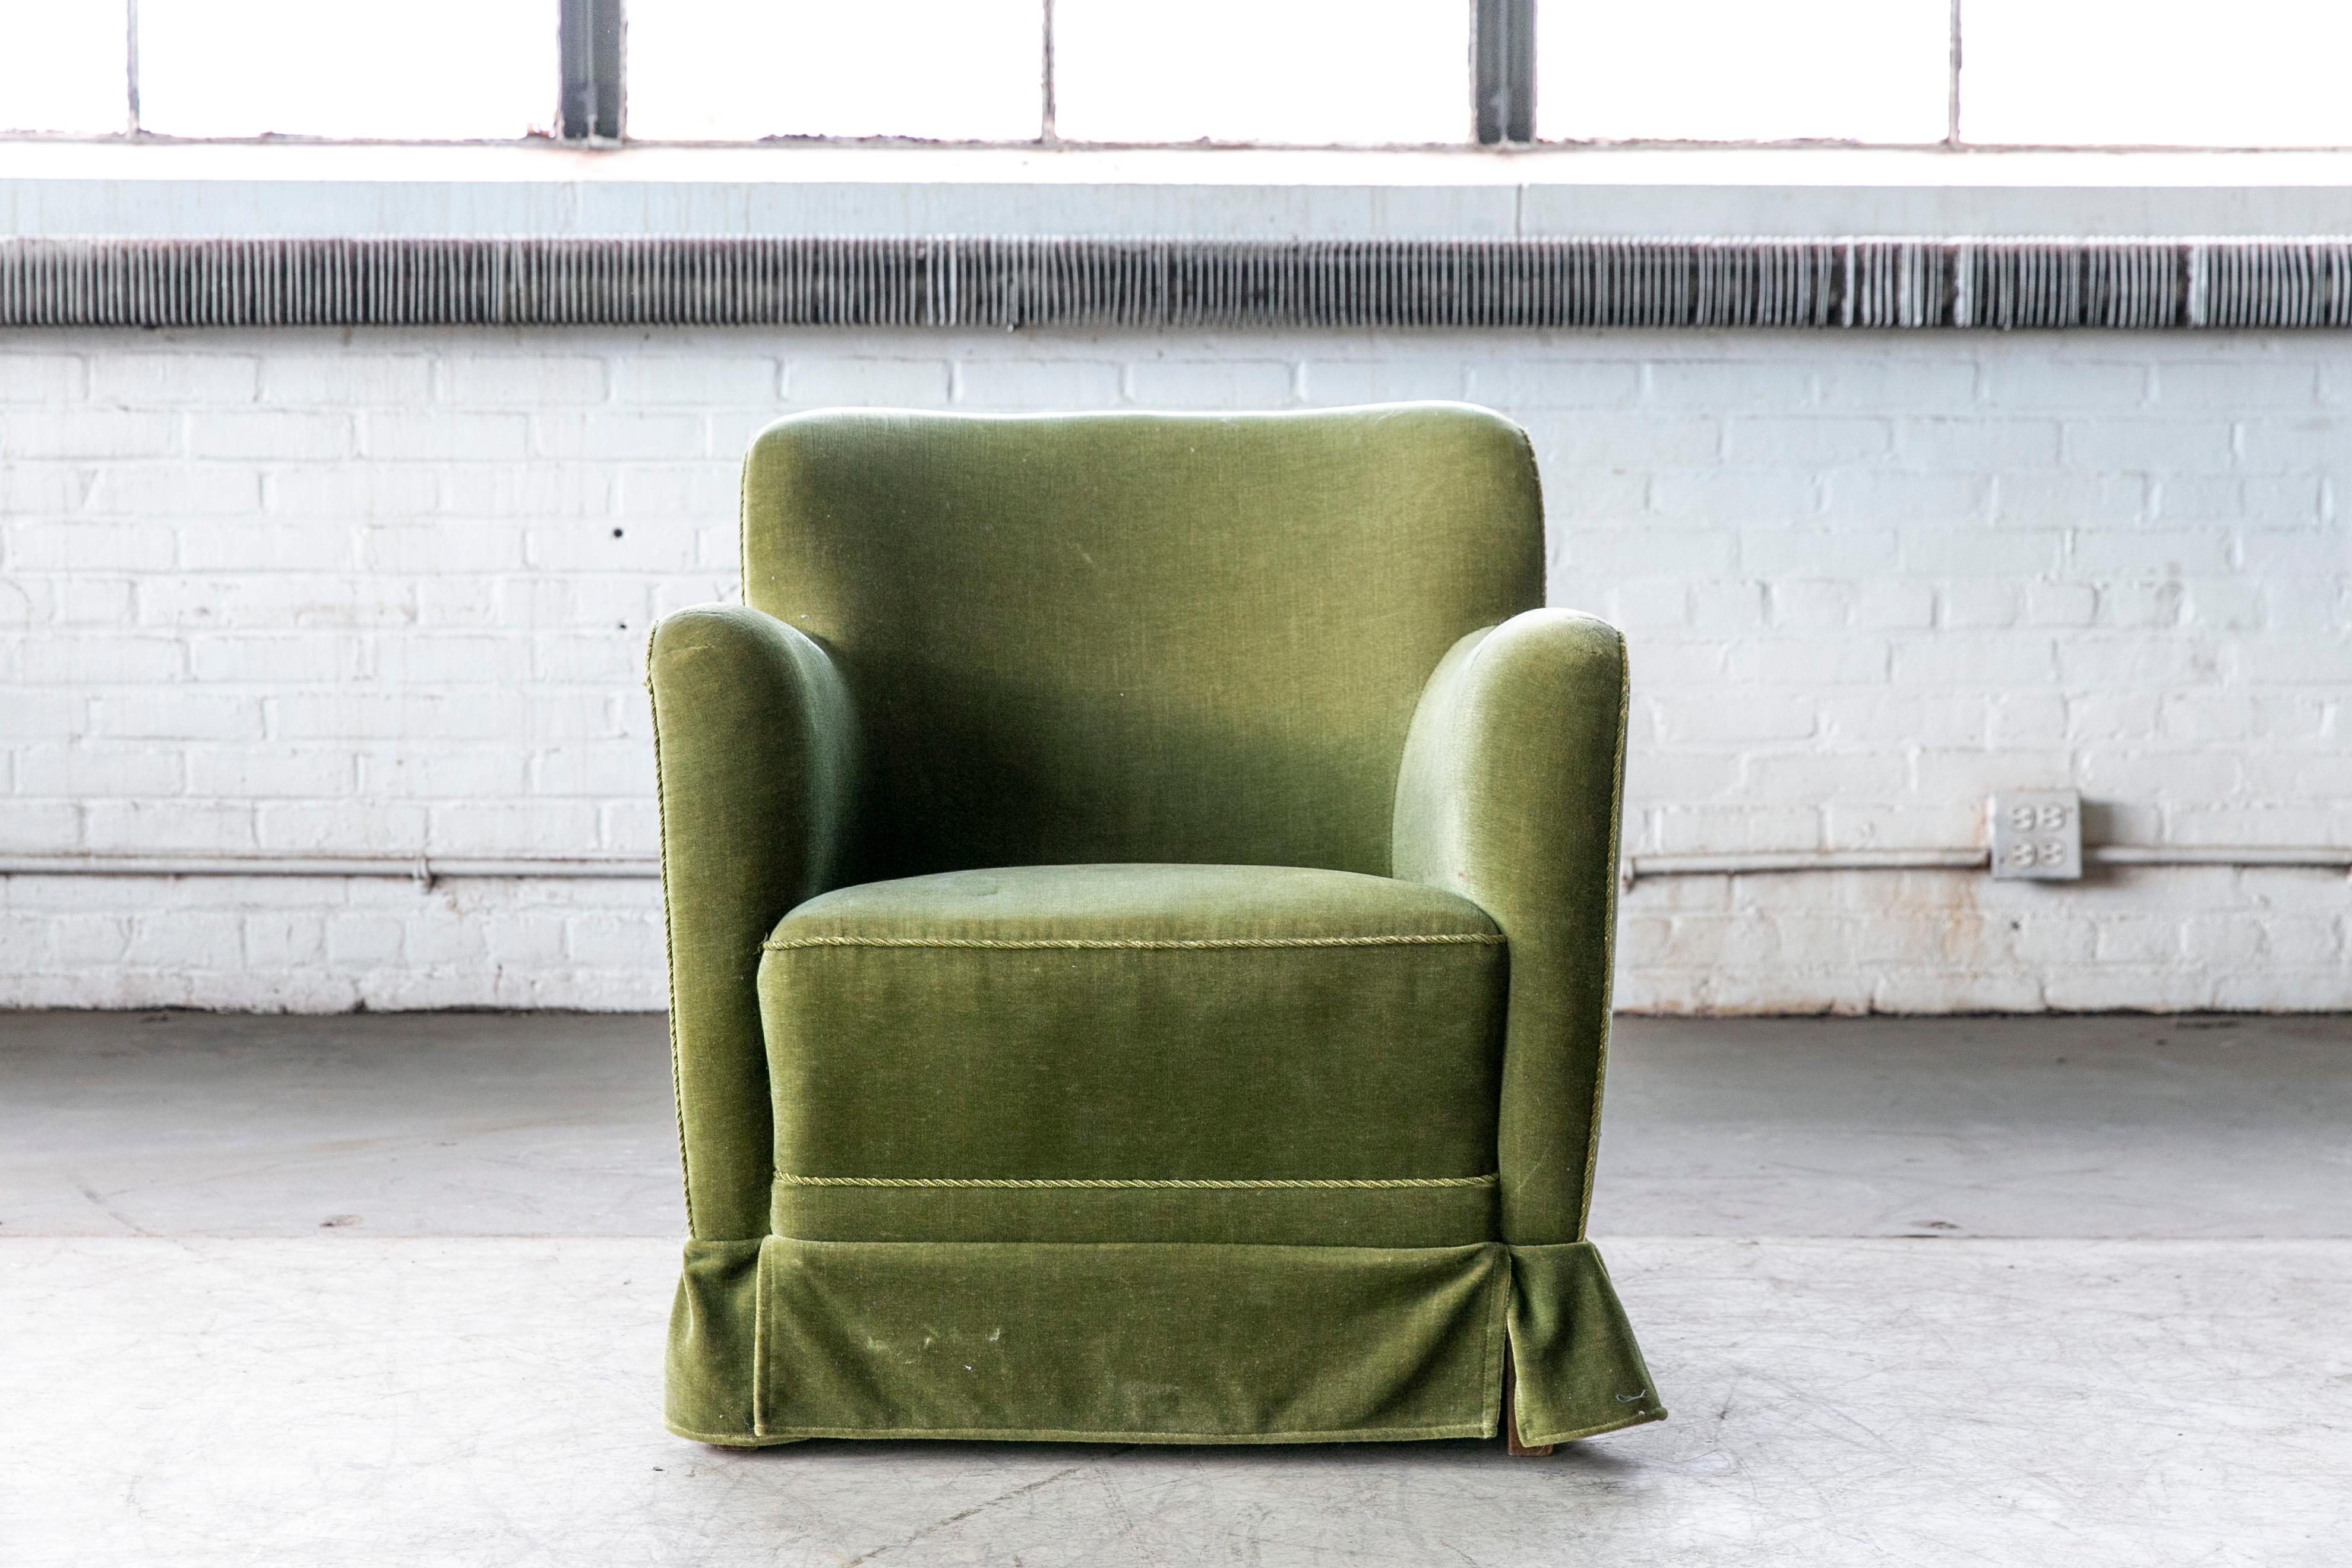 Danish Midcentury Lounge or Club Chair in Emerald Green Mohair, 1940s 1